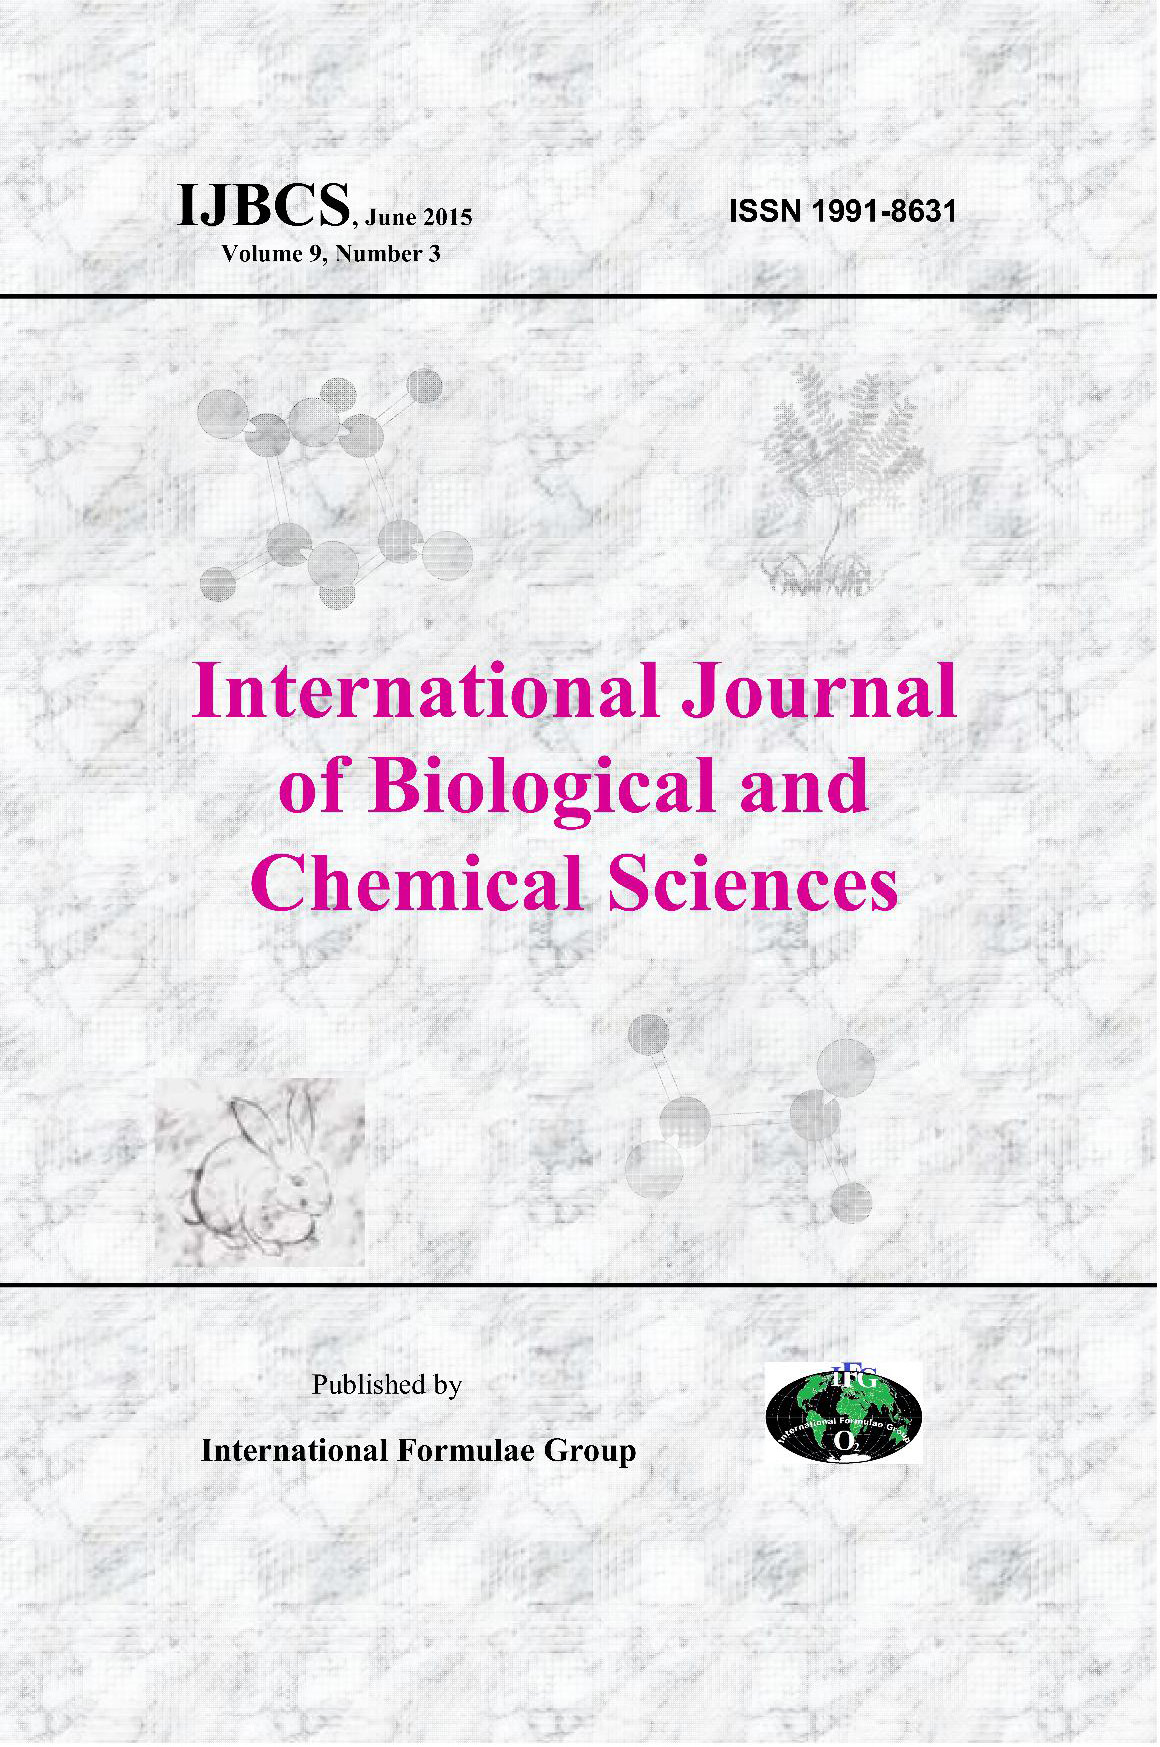 IFG Journal !